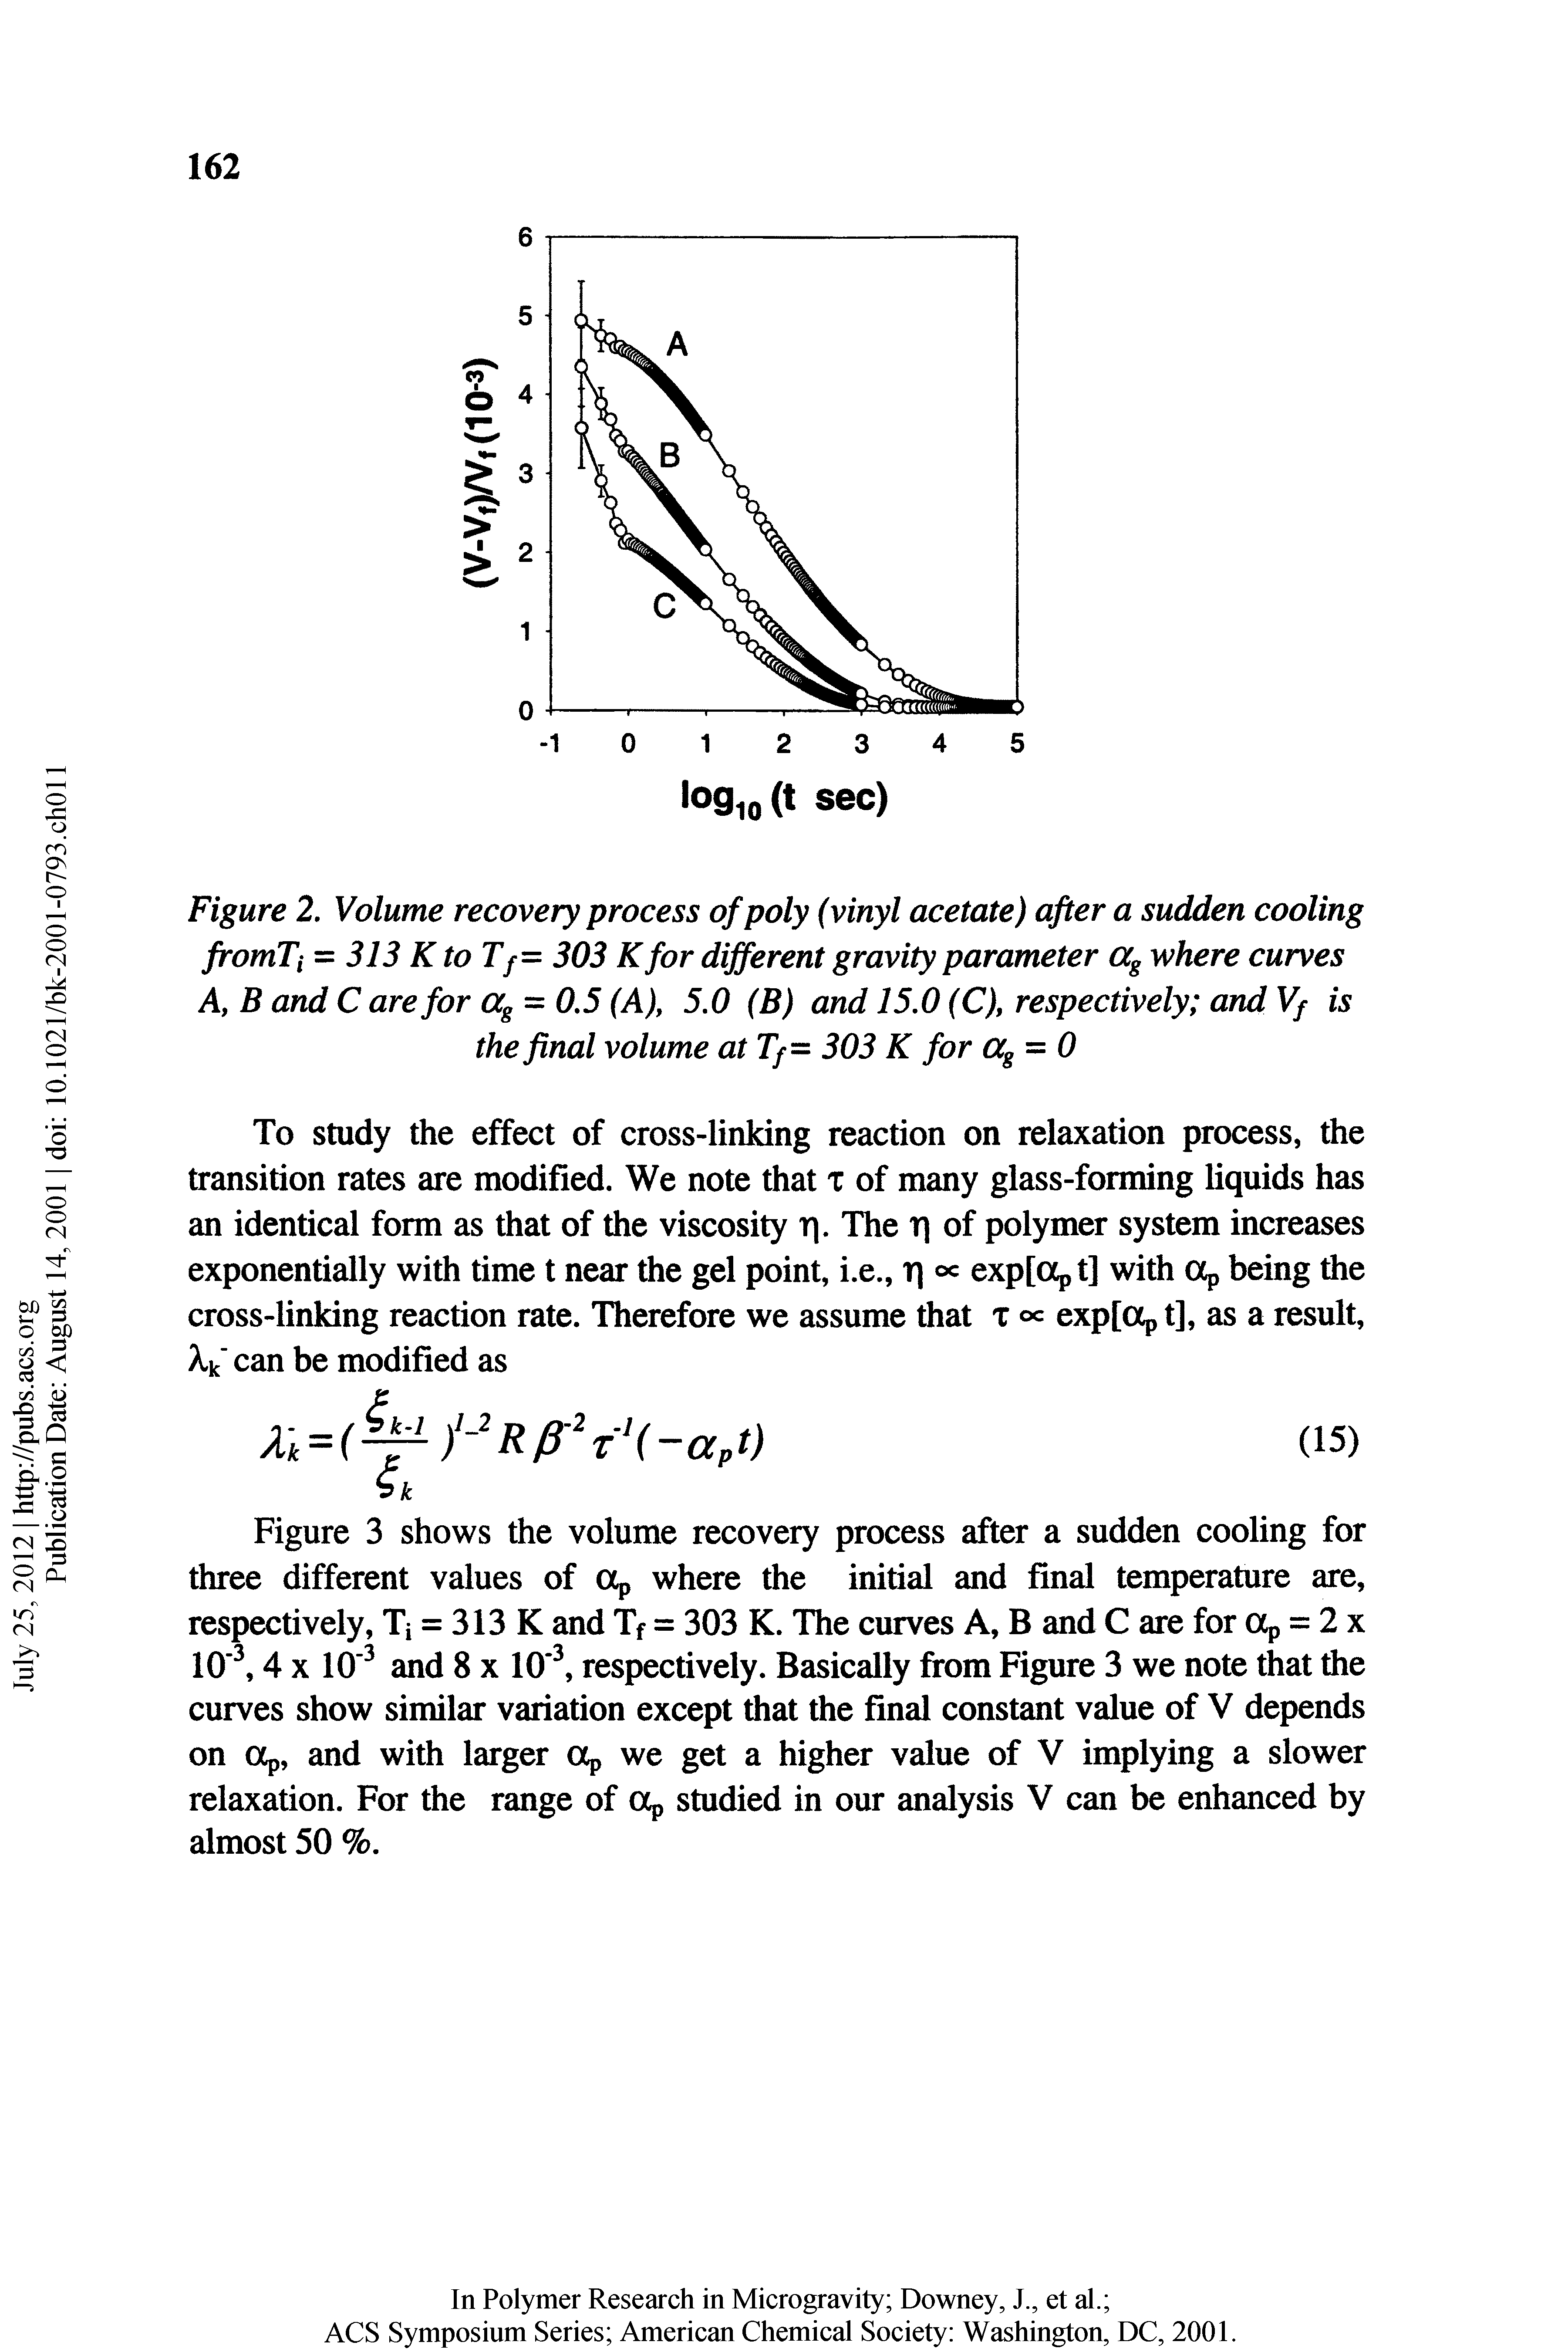 Figure 2. Volume recovery process of poly (vinyl acetate) after a sudden cooling fromTi = 313 KtoTf = 303 Kfor different gravity parameter ag where curves A, B and C are for ag = 0,5 (A), 5,0 (B) and 15,0 (C), respectively and Vf is the final volume at 7 = 303 K for ag = 0...